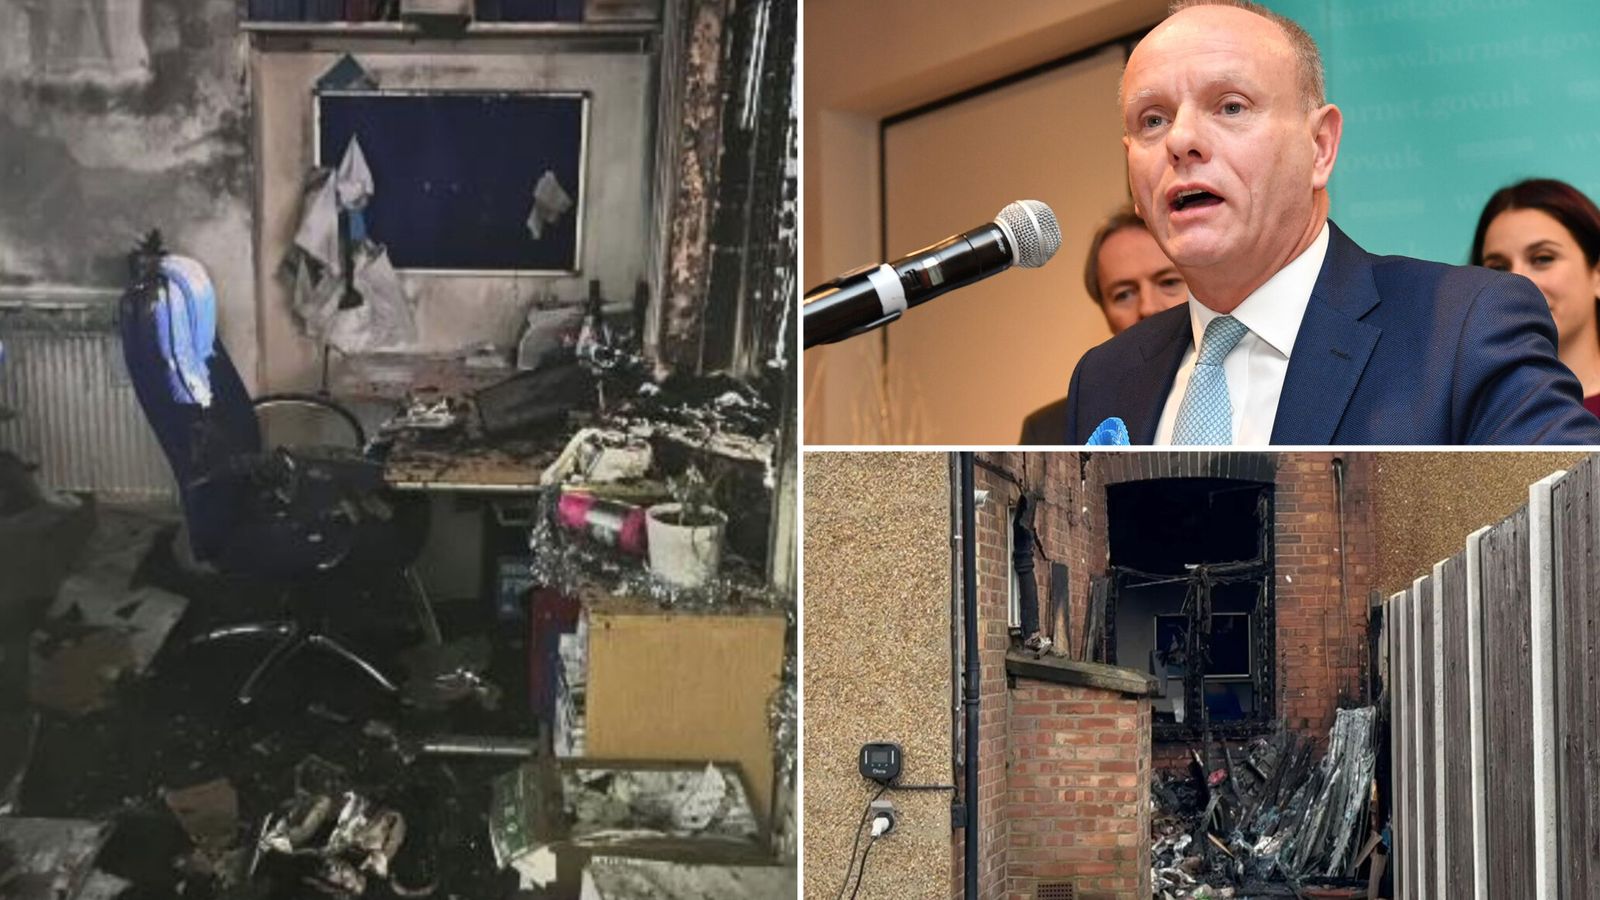 MP whose office was targeted in suspected arson reveals he wears a stab vest in public